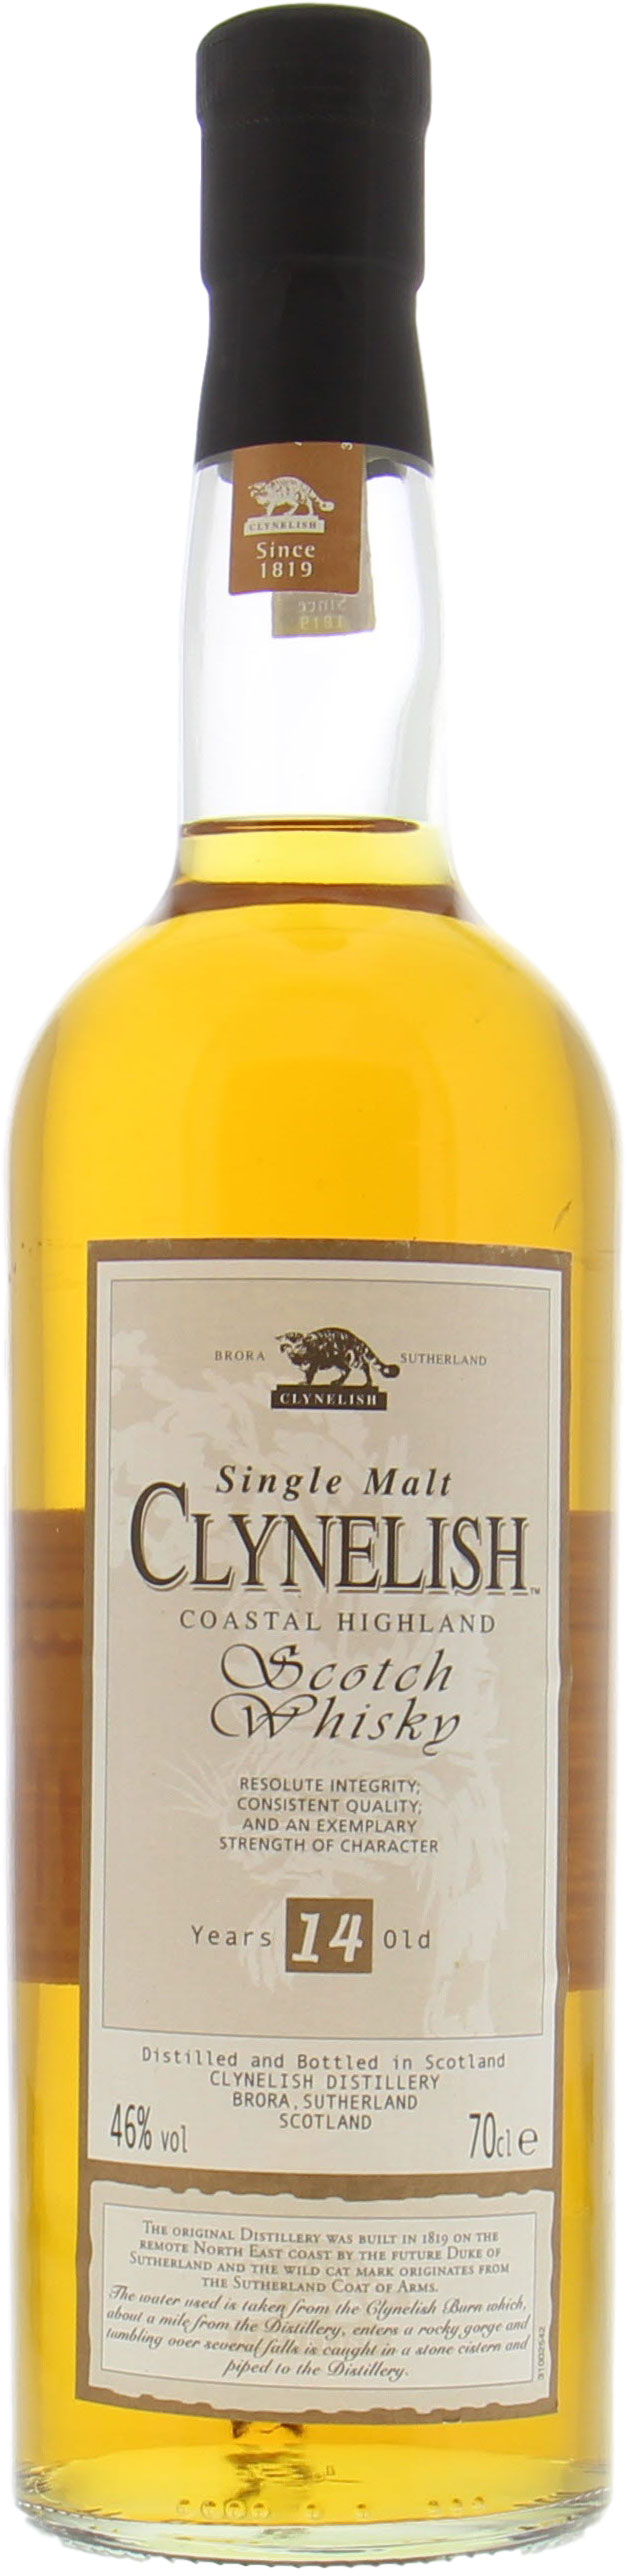 Clynelish - 14 years Old 3 Icons backlabel 46% NV In Original Container